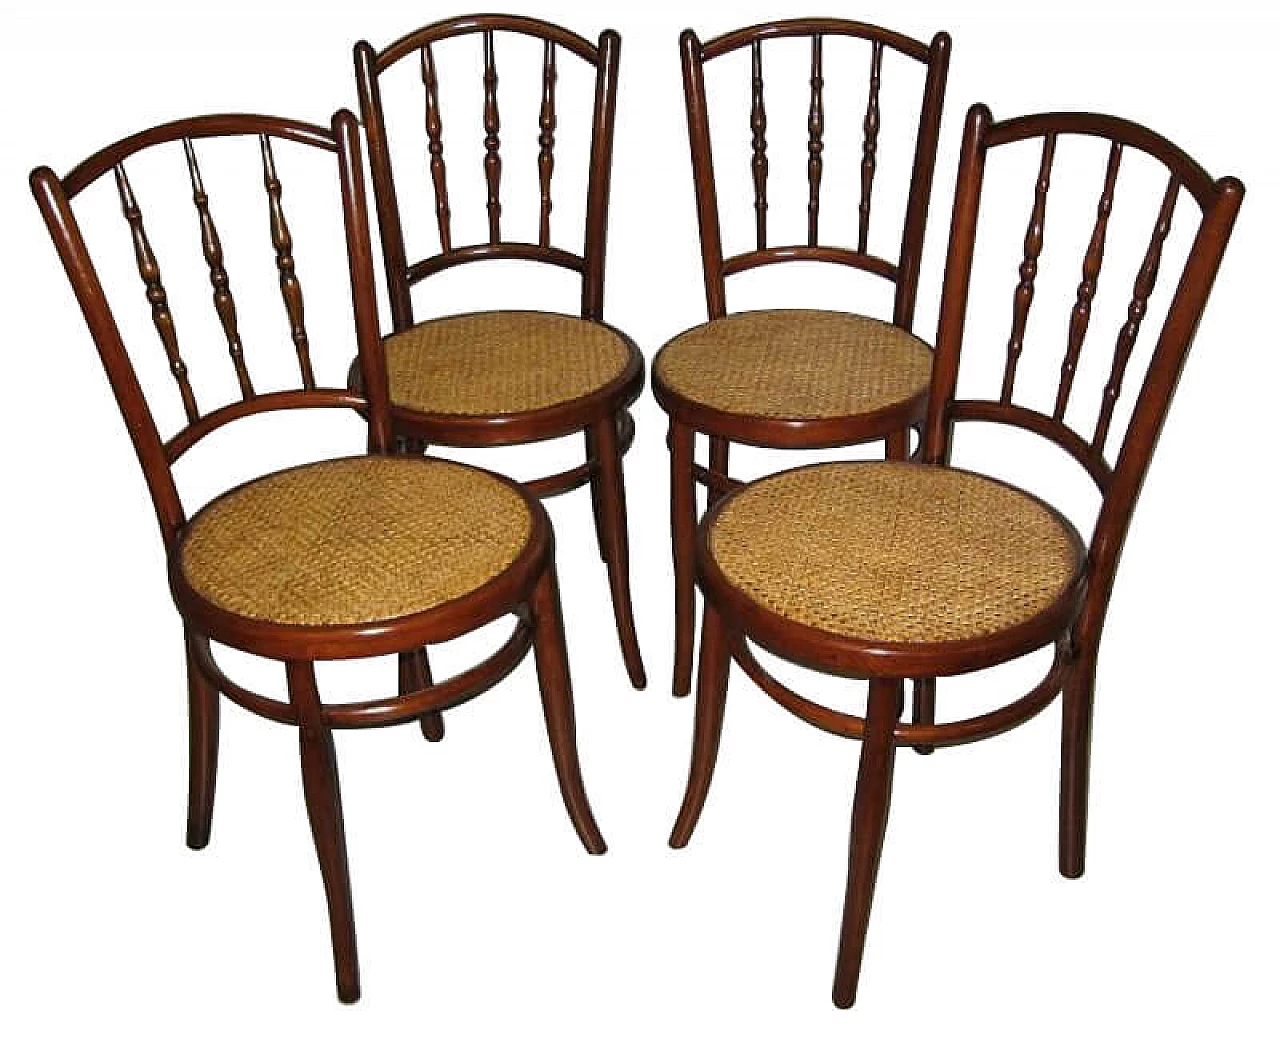 Series of 4 chairs marked with the brand J & J Kohn Wien Austria, beginning 20th century 1324169